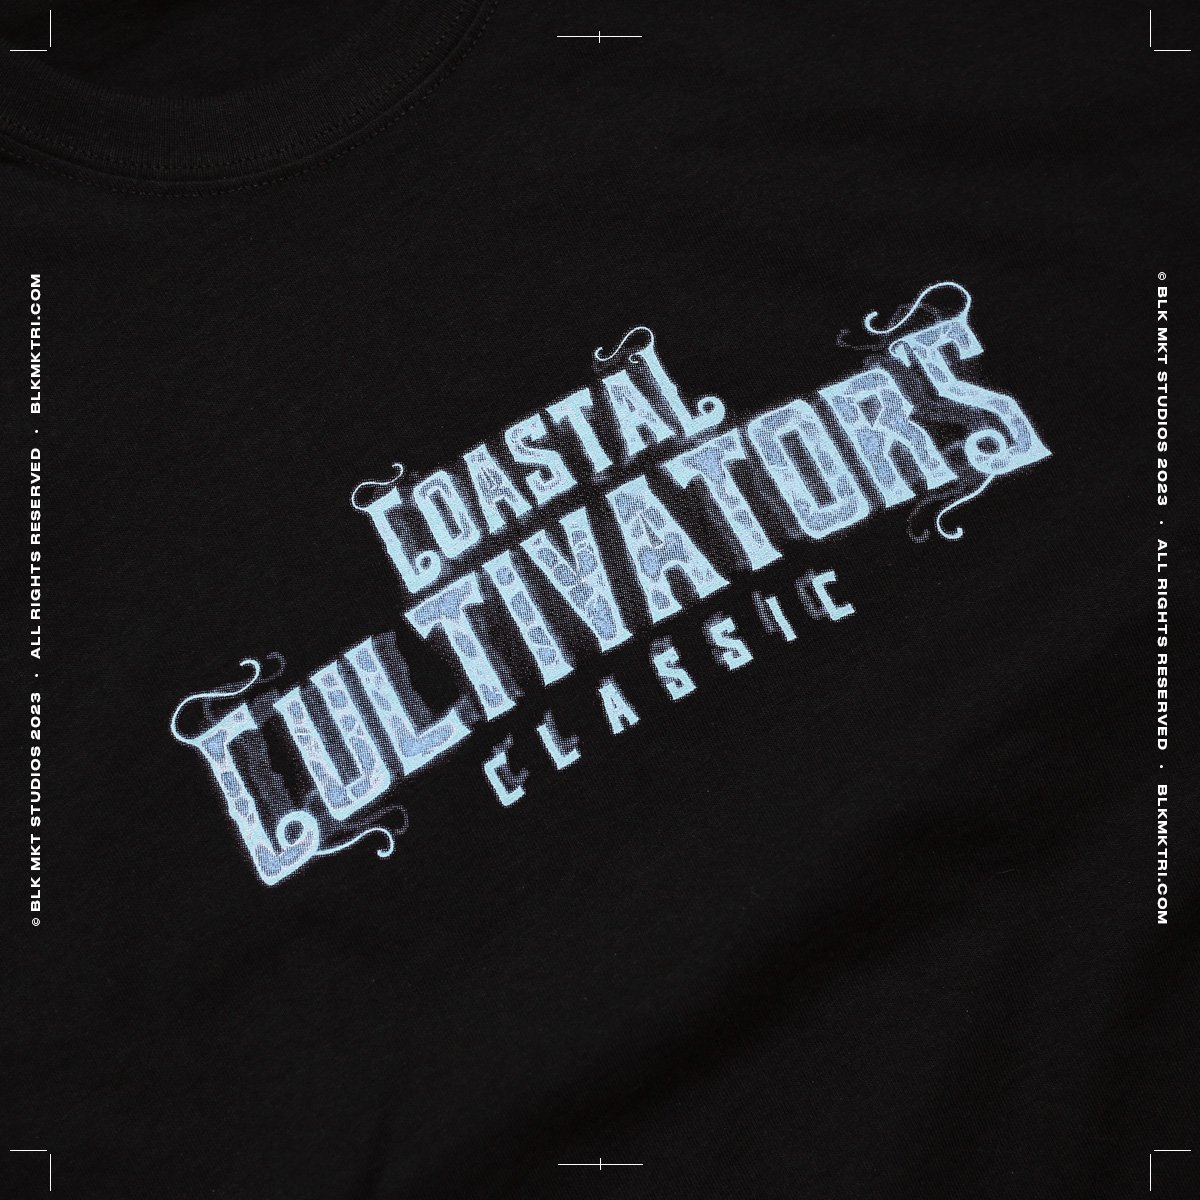 Screen printed t-shirts for our friends at @coastalclassic.ri / @motherearthwellnessri! 🌿

The Coastal Cultivator&rsquo;s Classic is a showcase event that celebrates cultivators, manufacturers, and industry professionals working in Rhode Island&rsqu